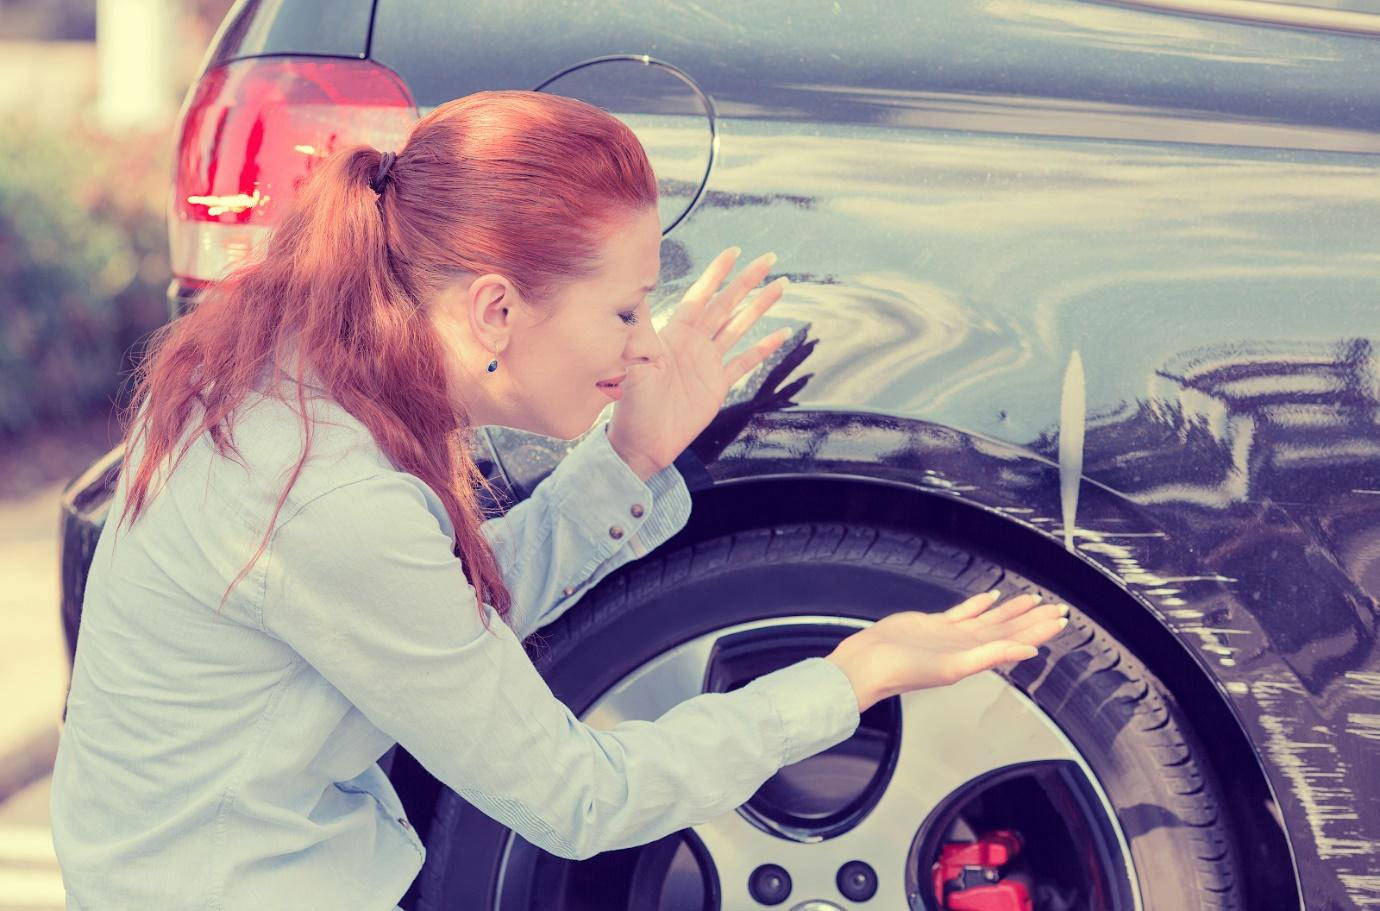  A woman observing deep scratches on her car’s paint